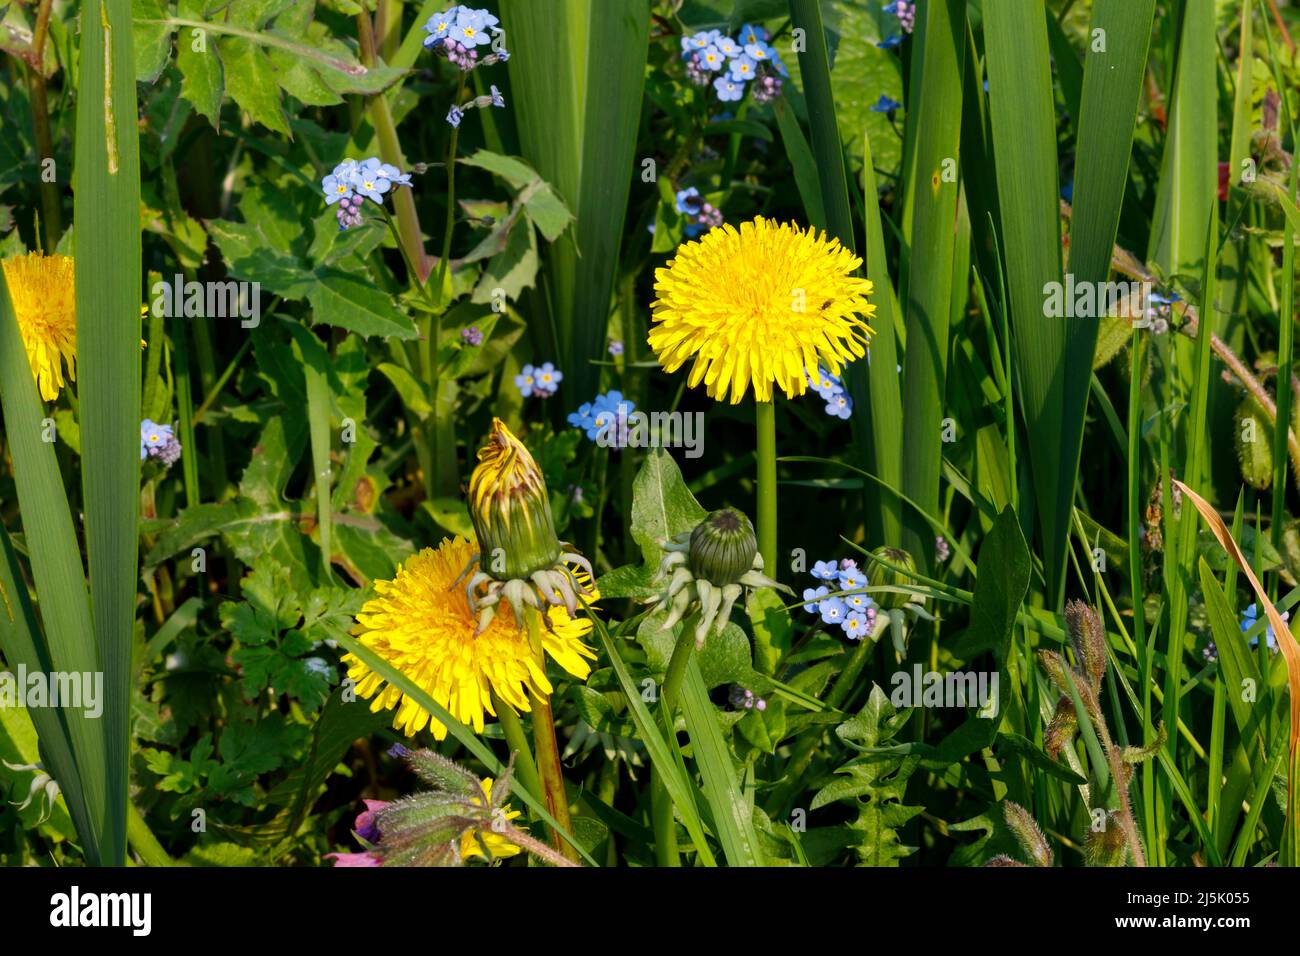 Common dandelion (Taraxacum officinale) commonly seen as a garden weed, Sussex, UK Stock Photo